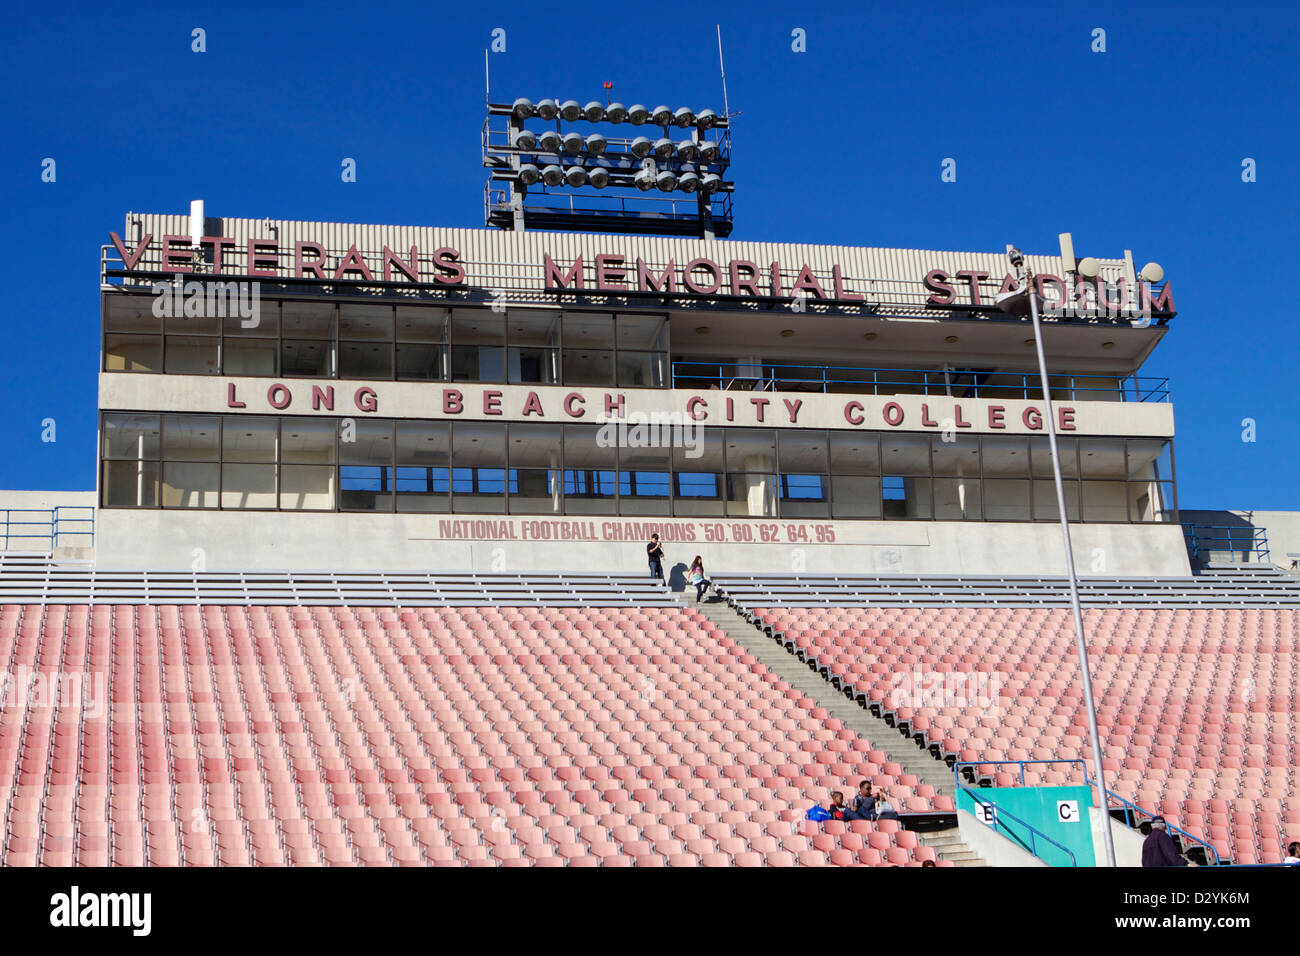 Veterans Stadium - History, Photos & More of the former NFL